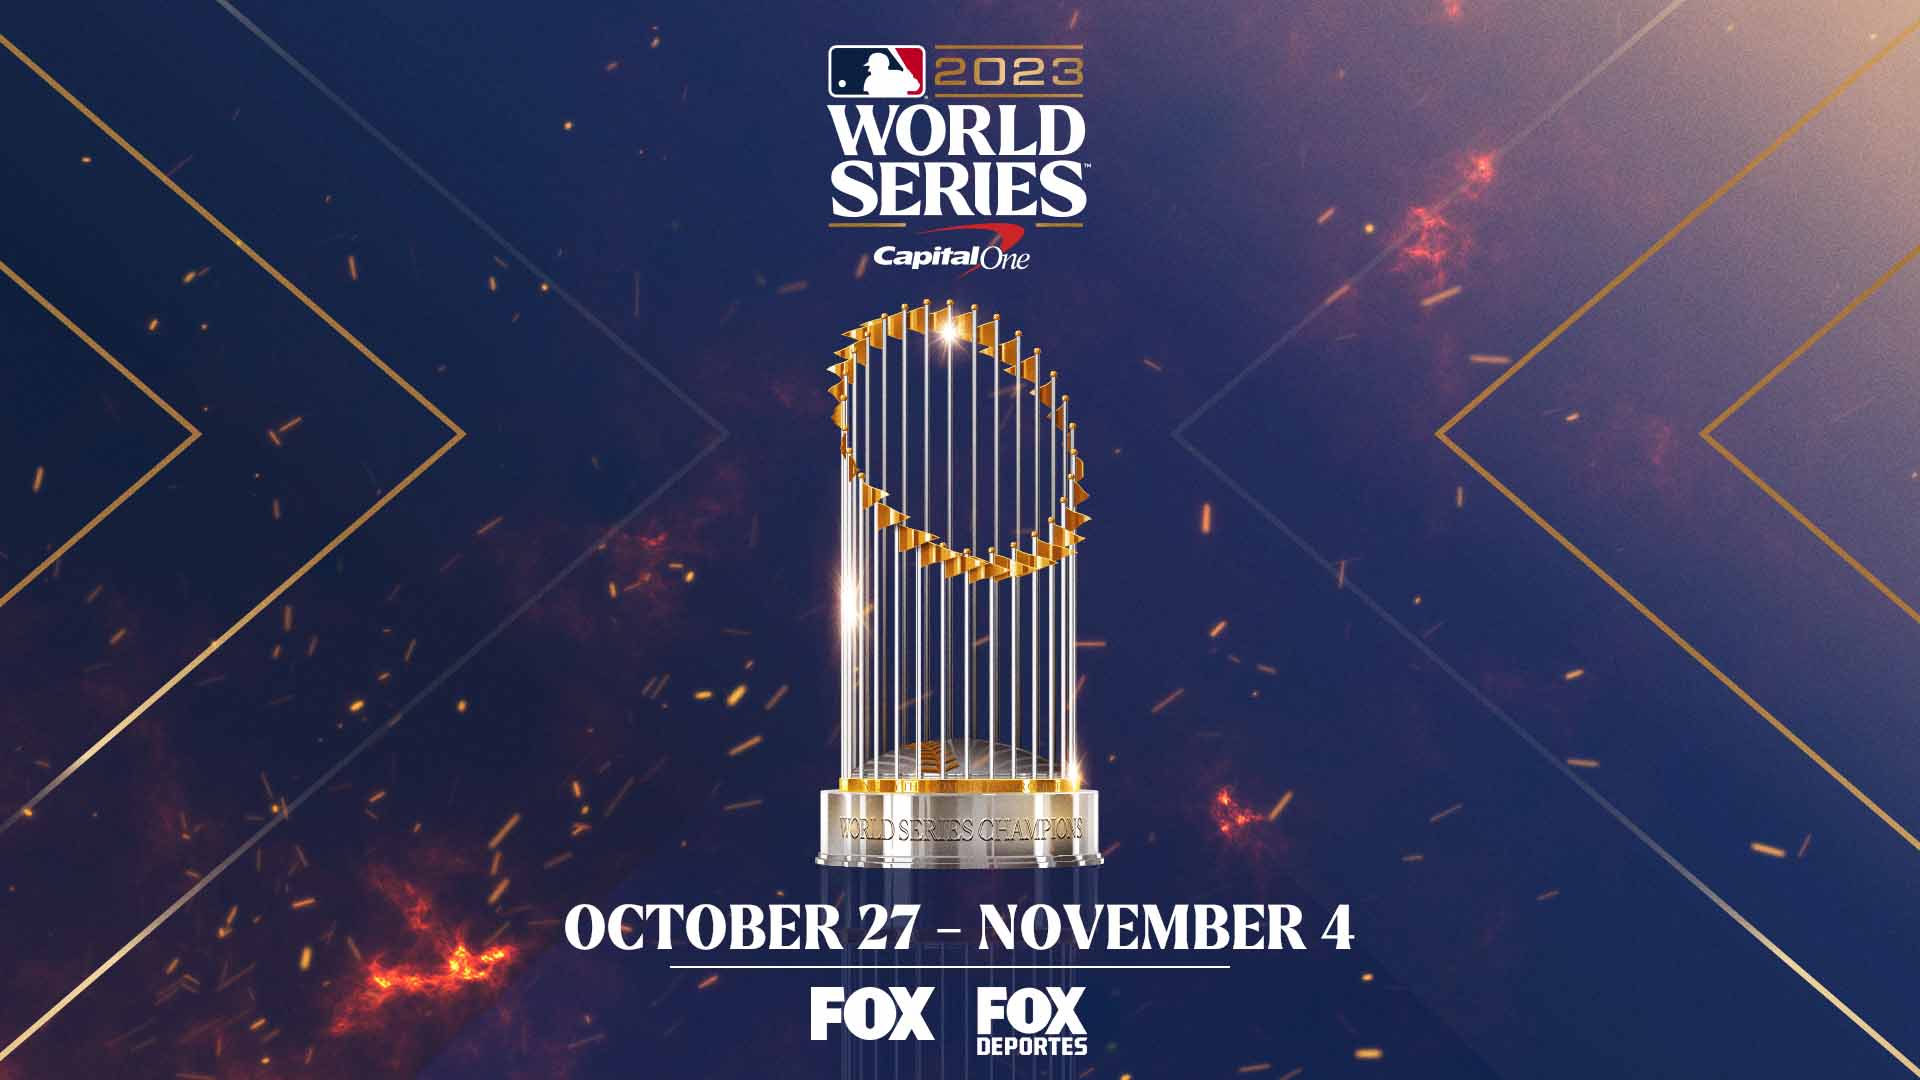 World Series RangersDiamondbacks Schedule, Preview, and More THE DIG